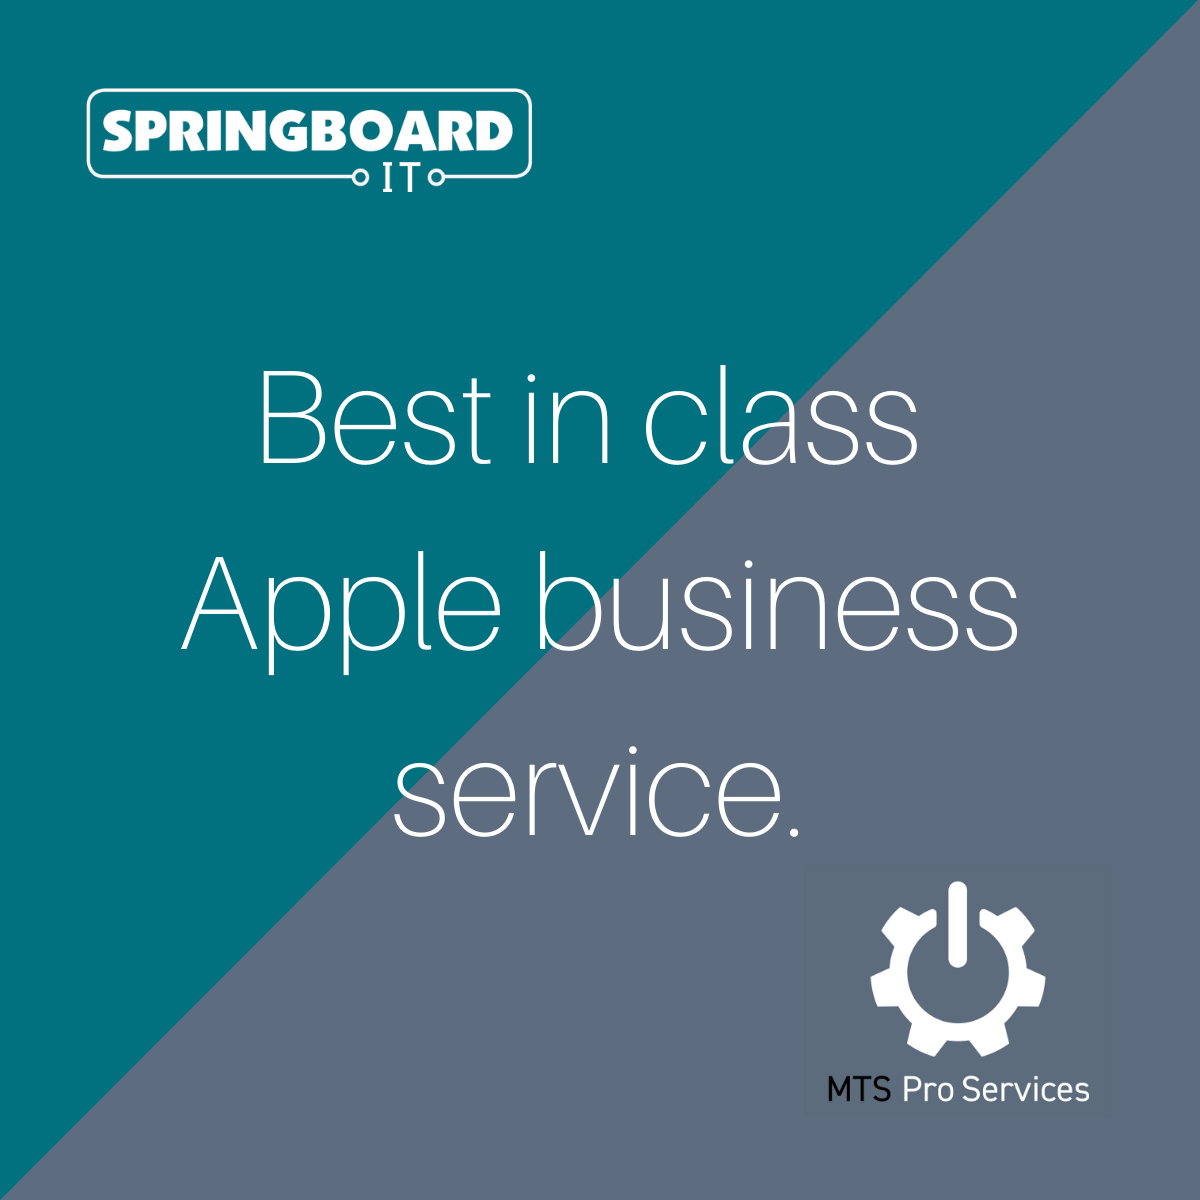 Springboard IT joins forces with MTS Pro Services